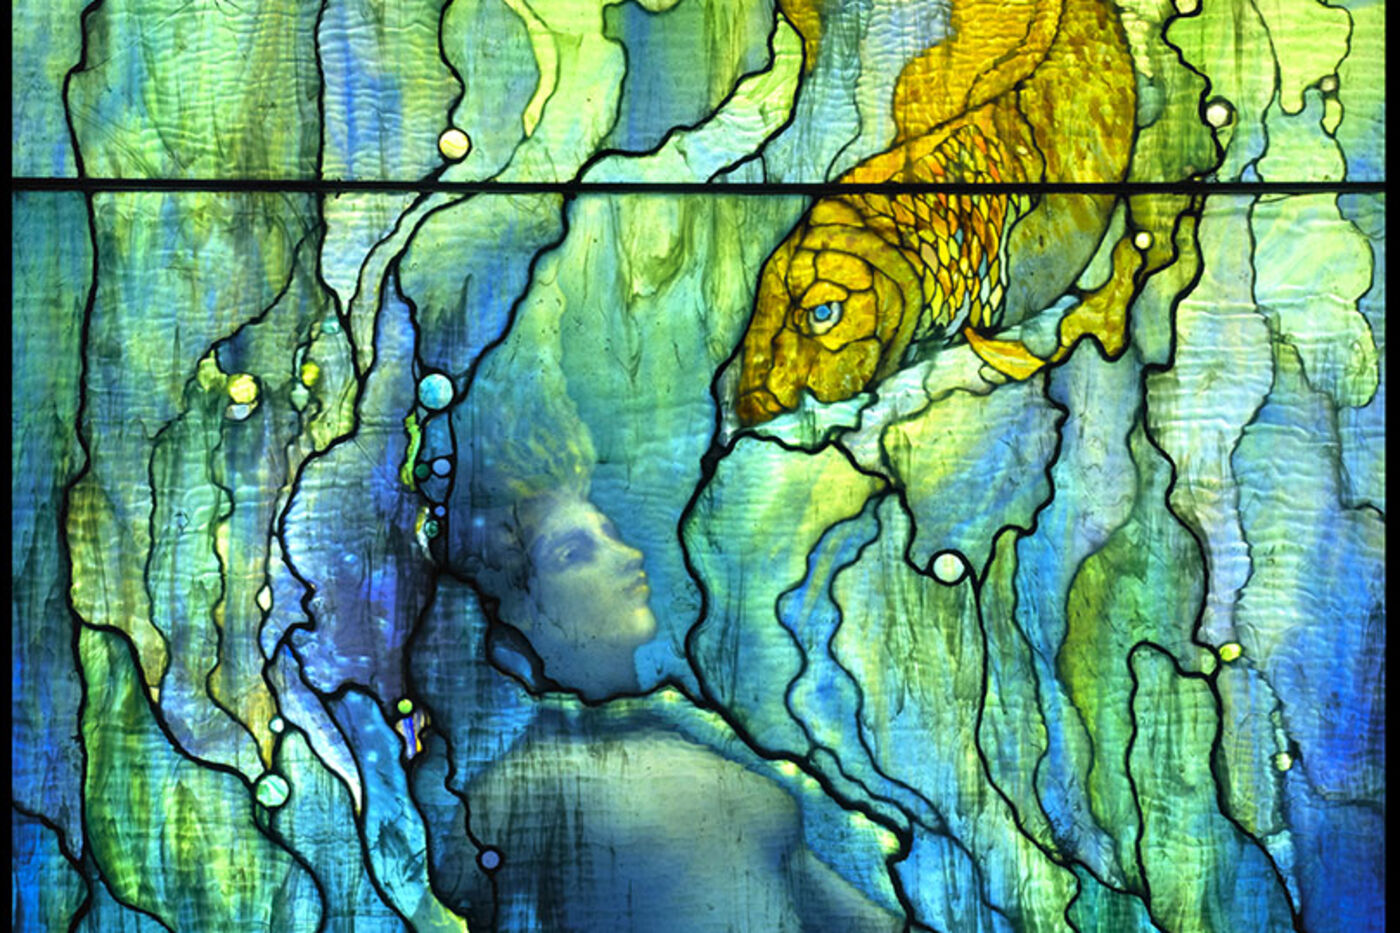 Detail of a Tiffany window, mermaid and fish, backlit, displayed in the Gem Hall.